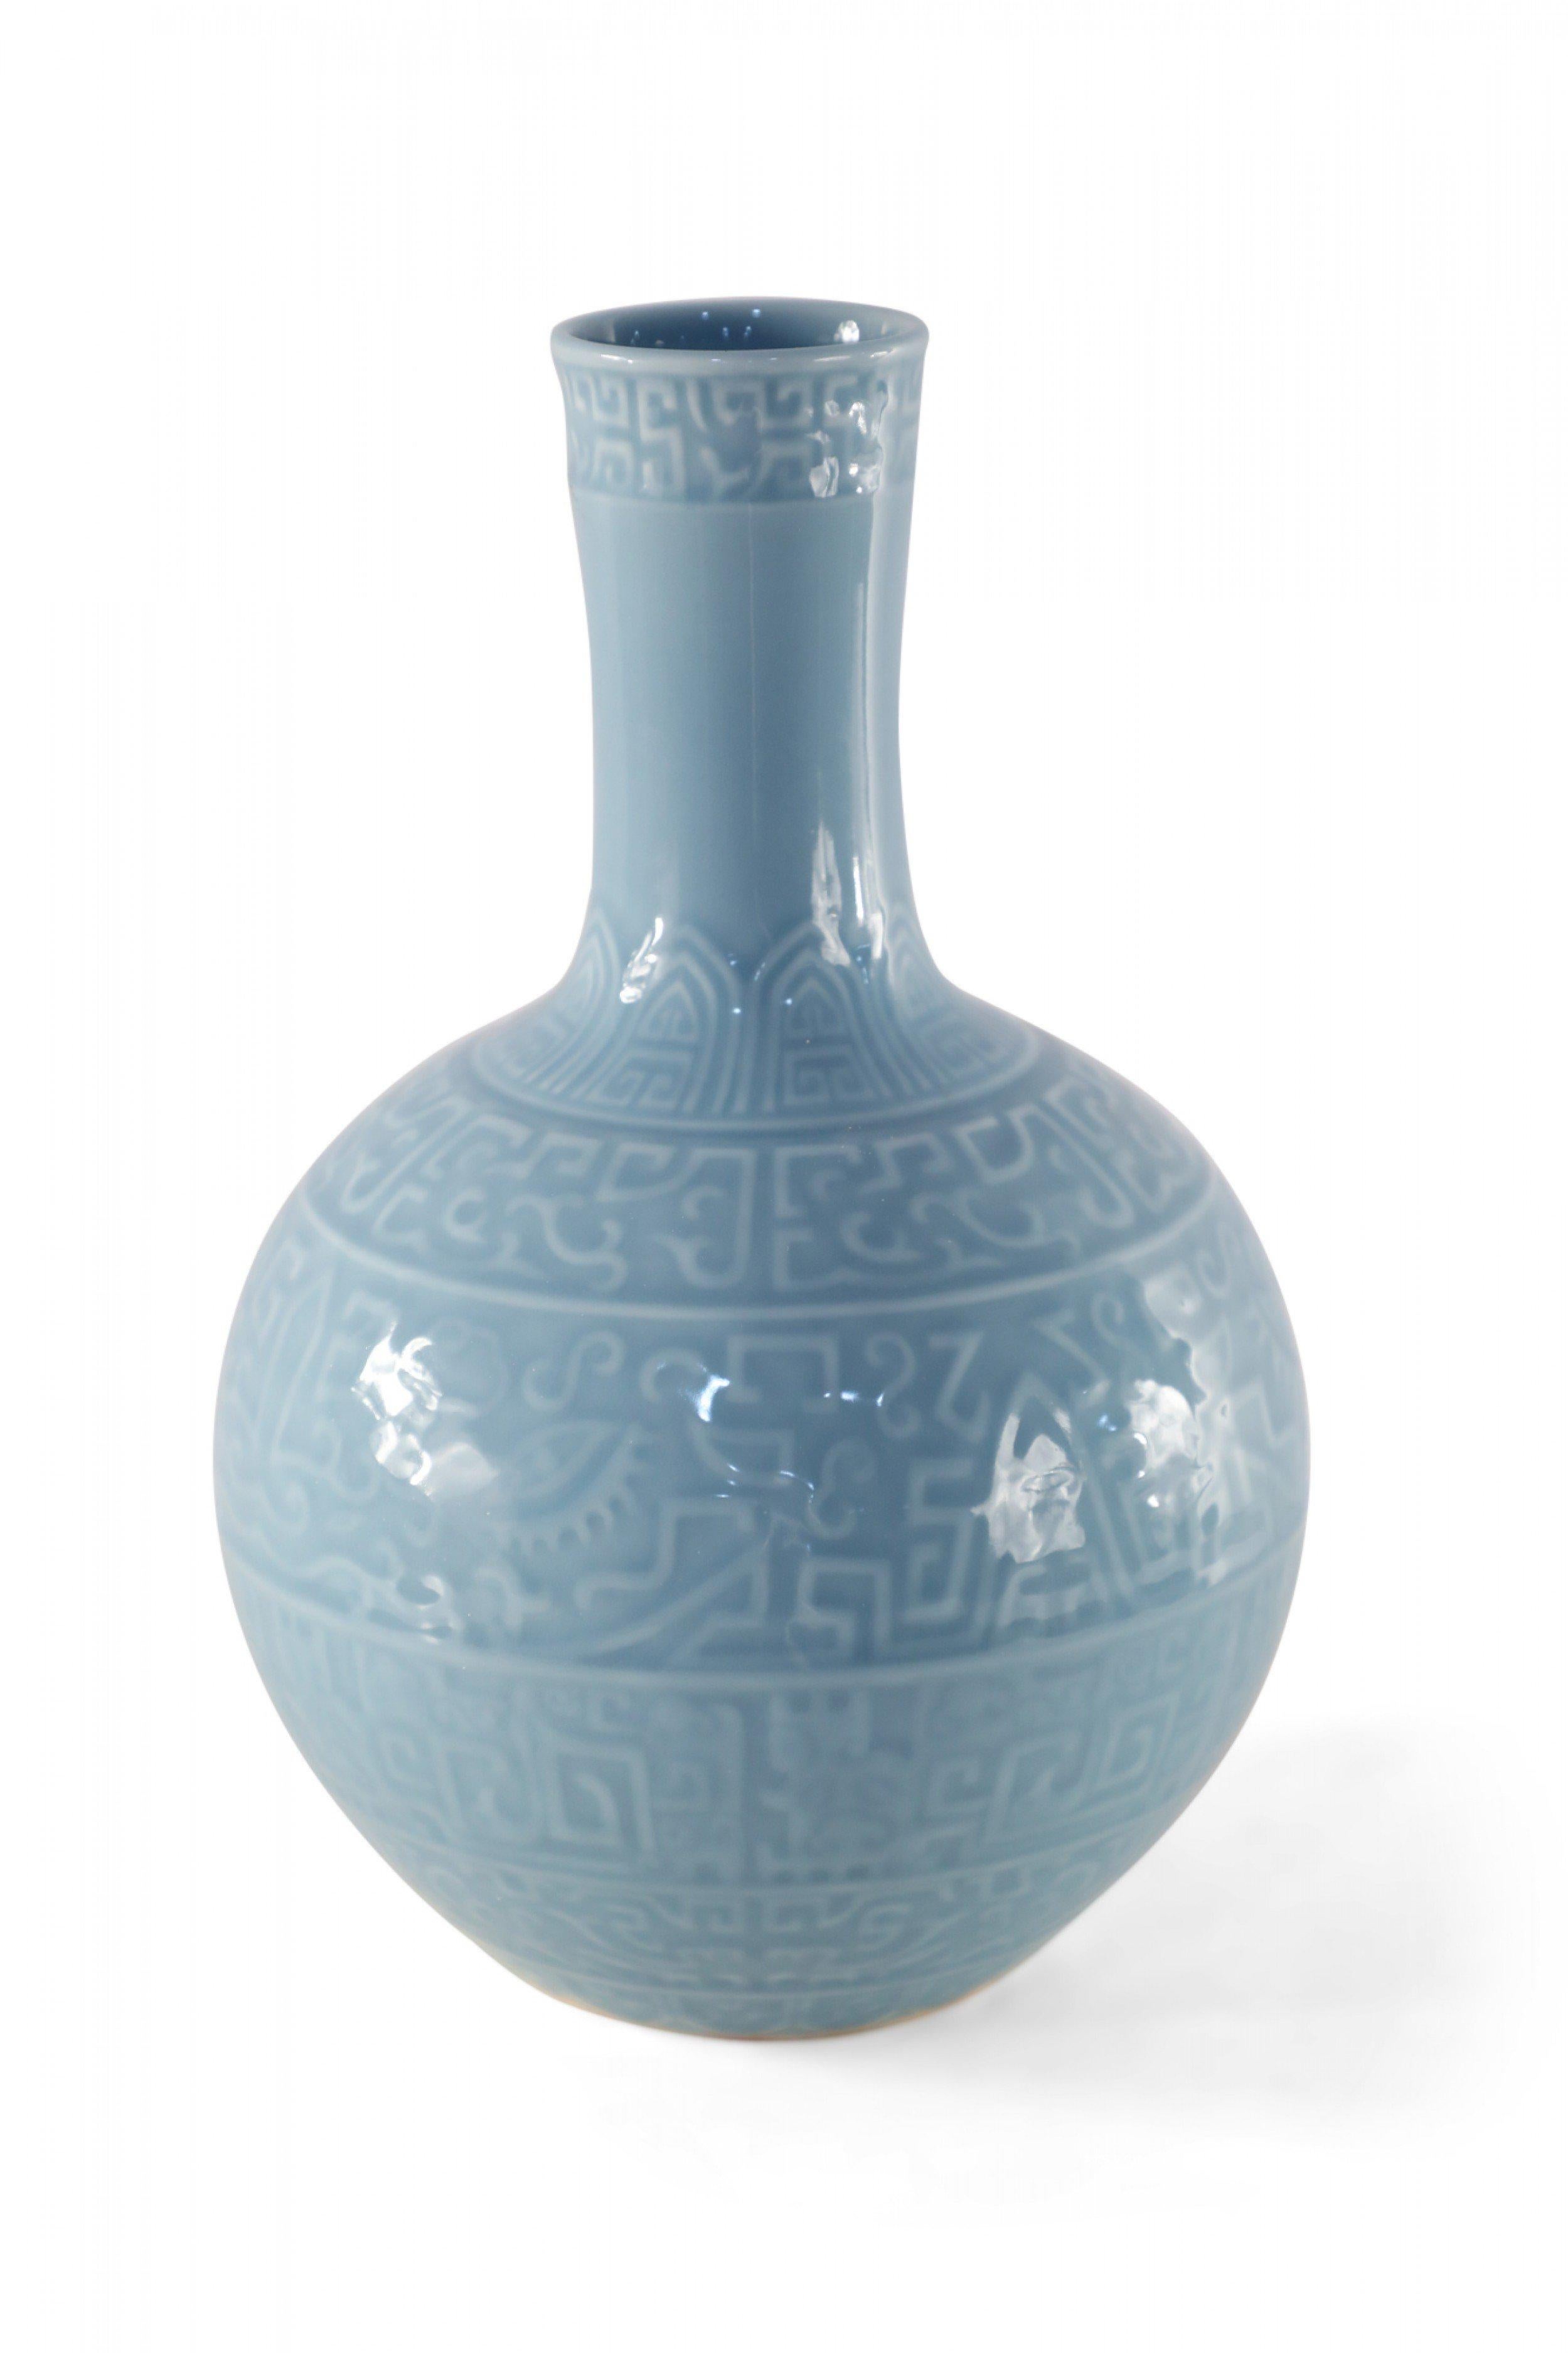 Chinese Qing Dynasty Style (20th century) cornflower blue porcelain vase with a globular form, wrapped in bands of a raised, geometric patterns (date mark on bottom, see photos).